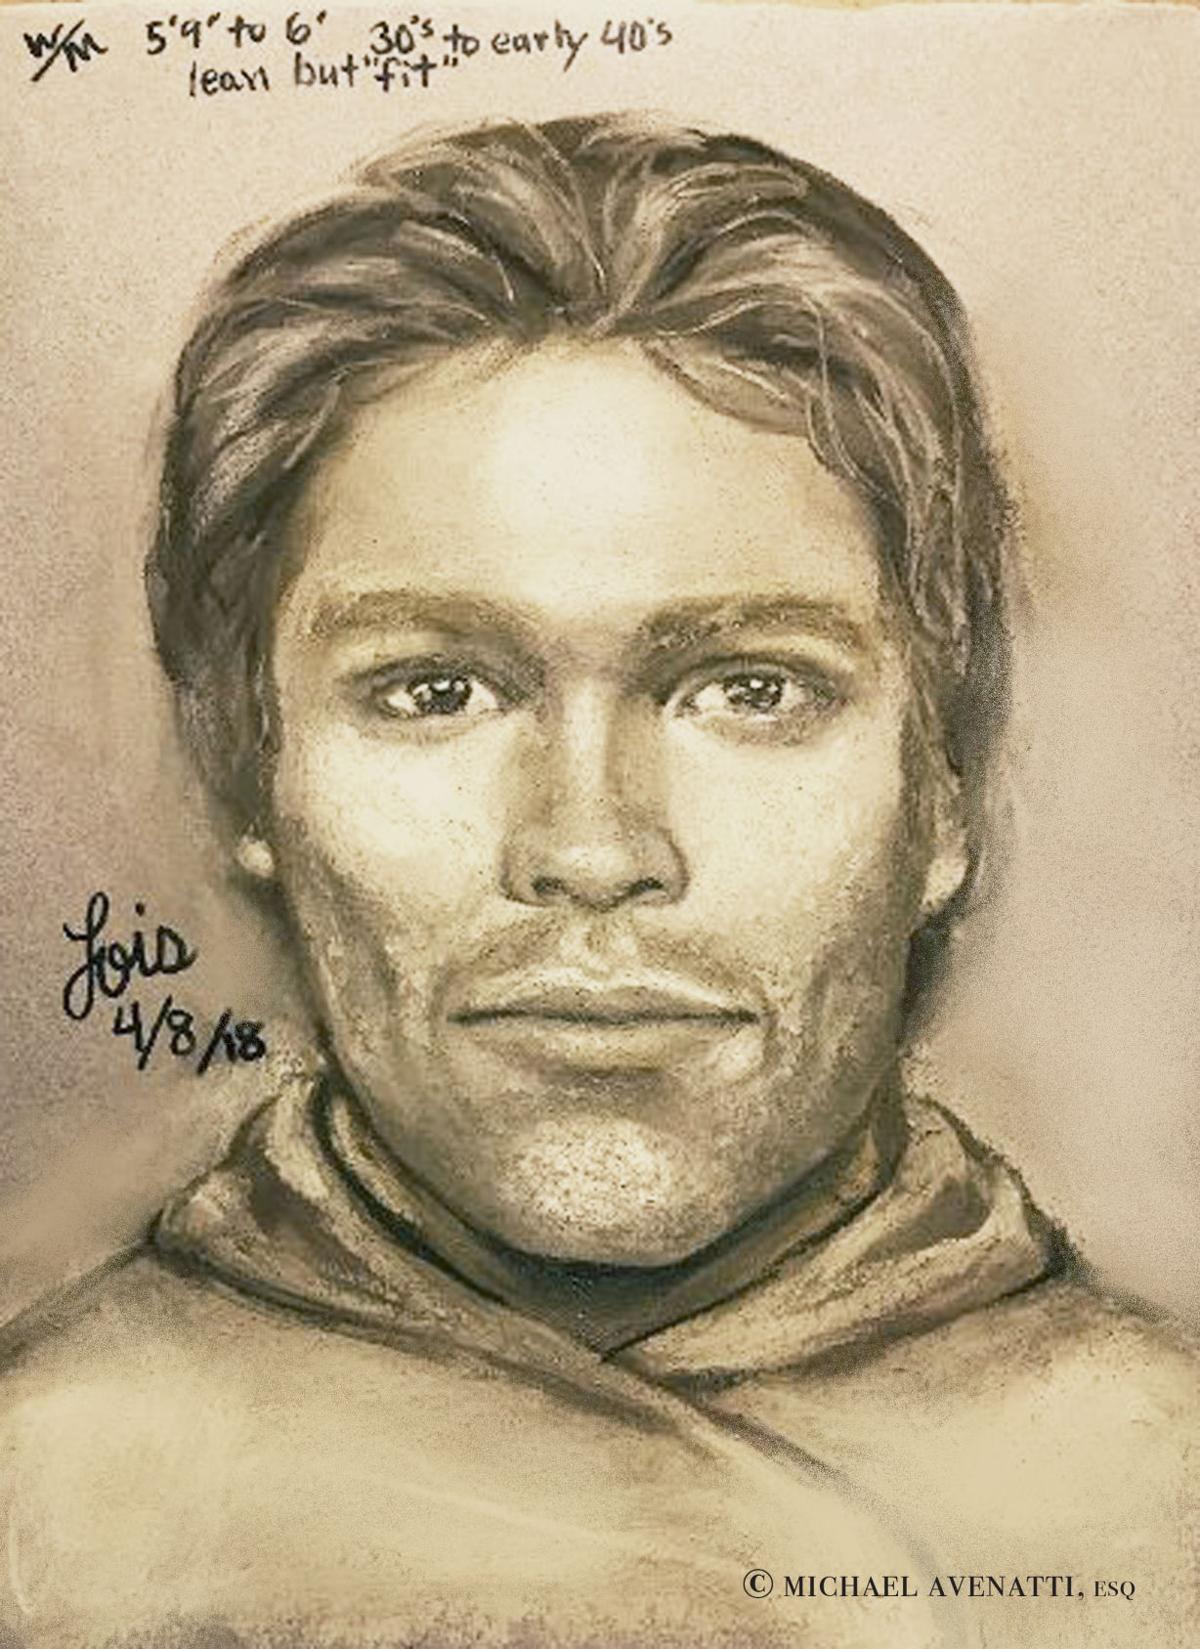 Porn Star Stormy Daniels Releases Sketch Of Man She Says